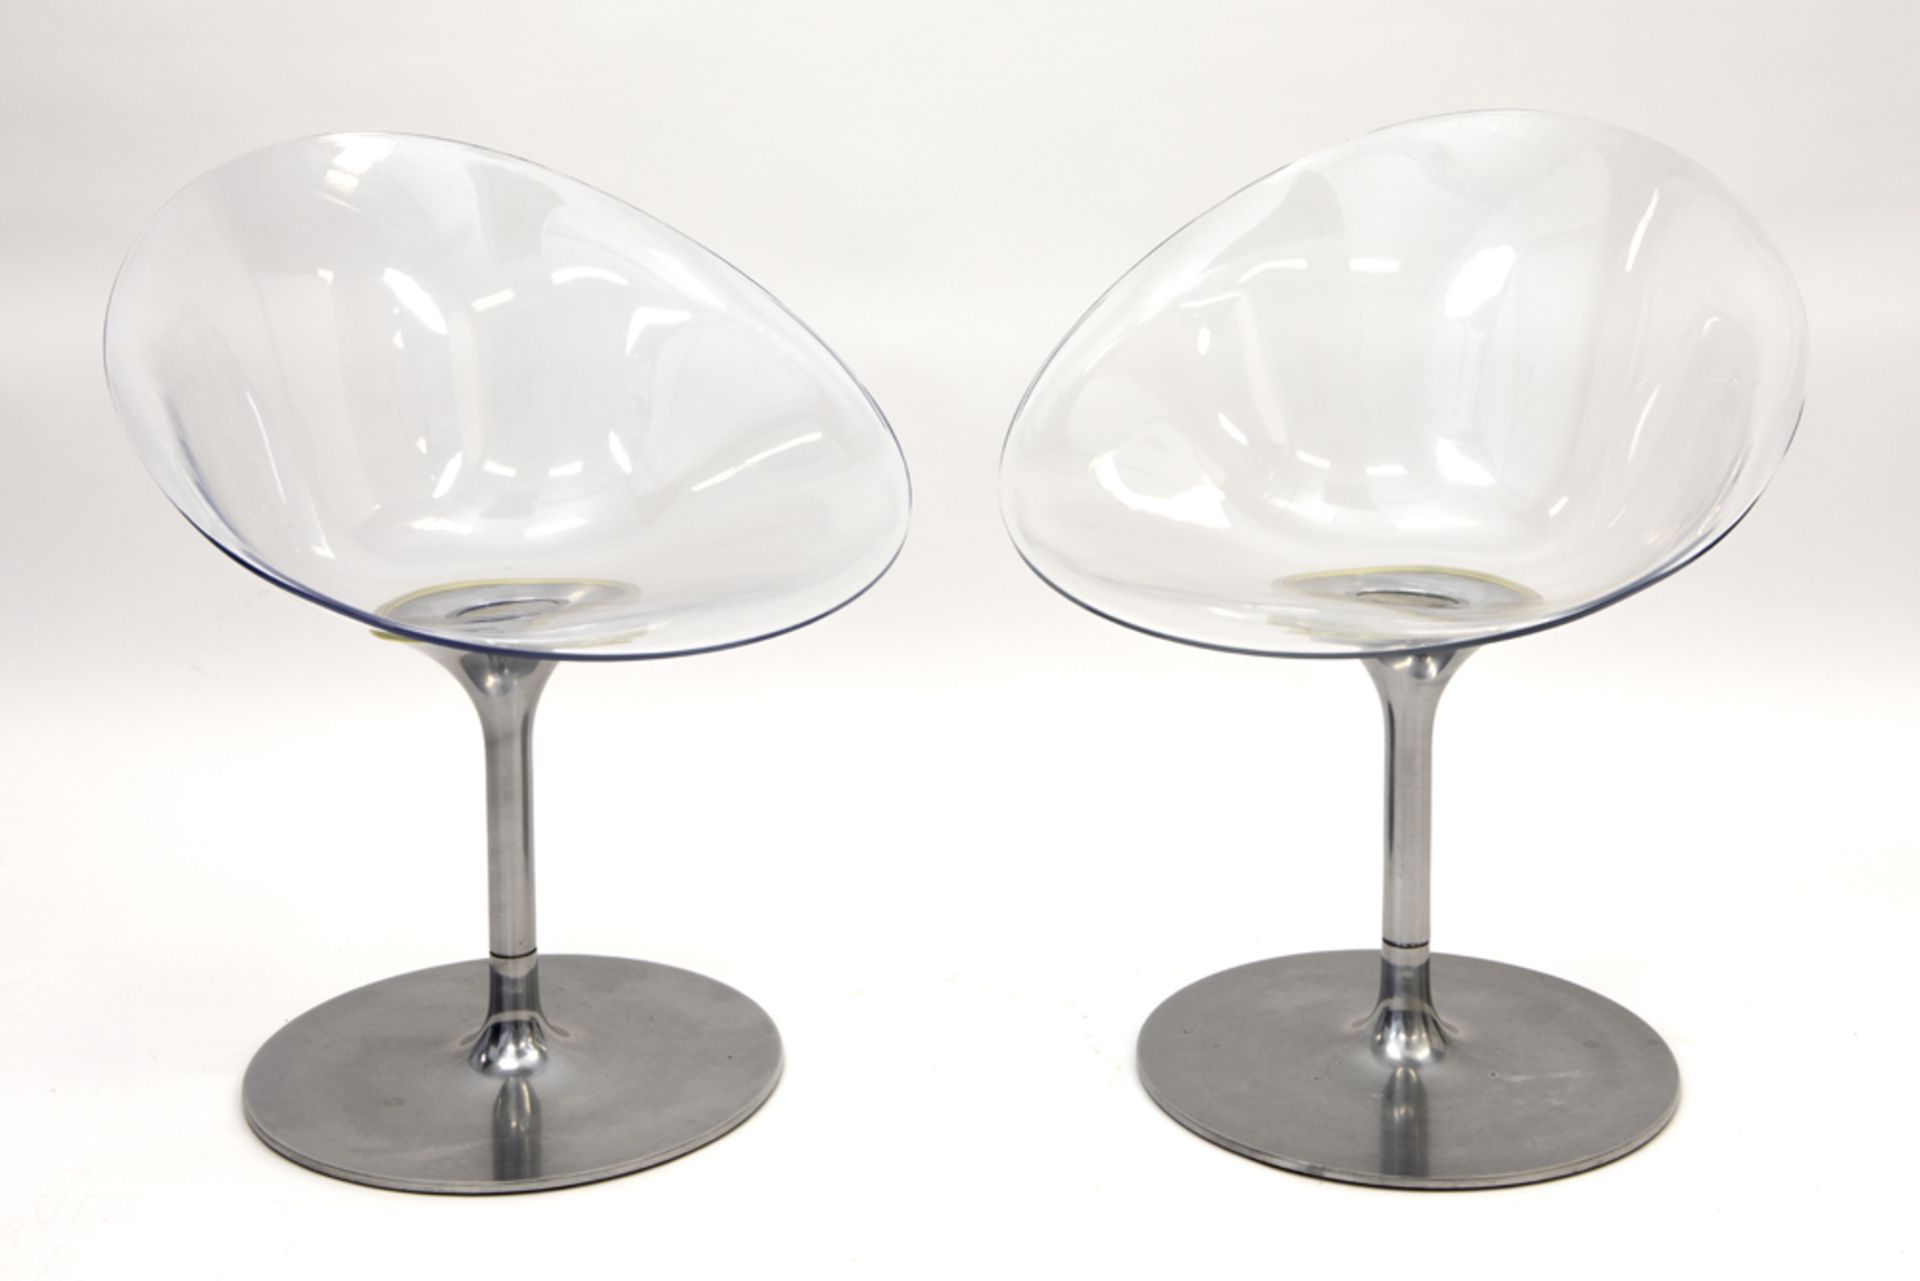 two Philippe Starck Eros design chairs in plexi and steel made by Kartell - marked||PHILIPPE